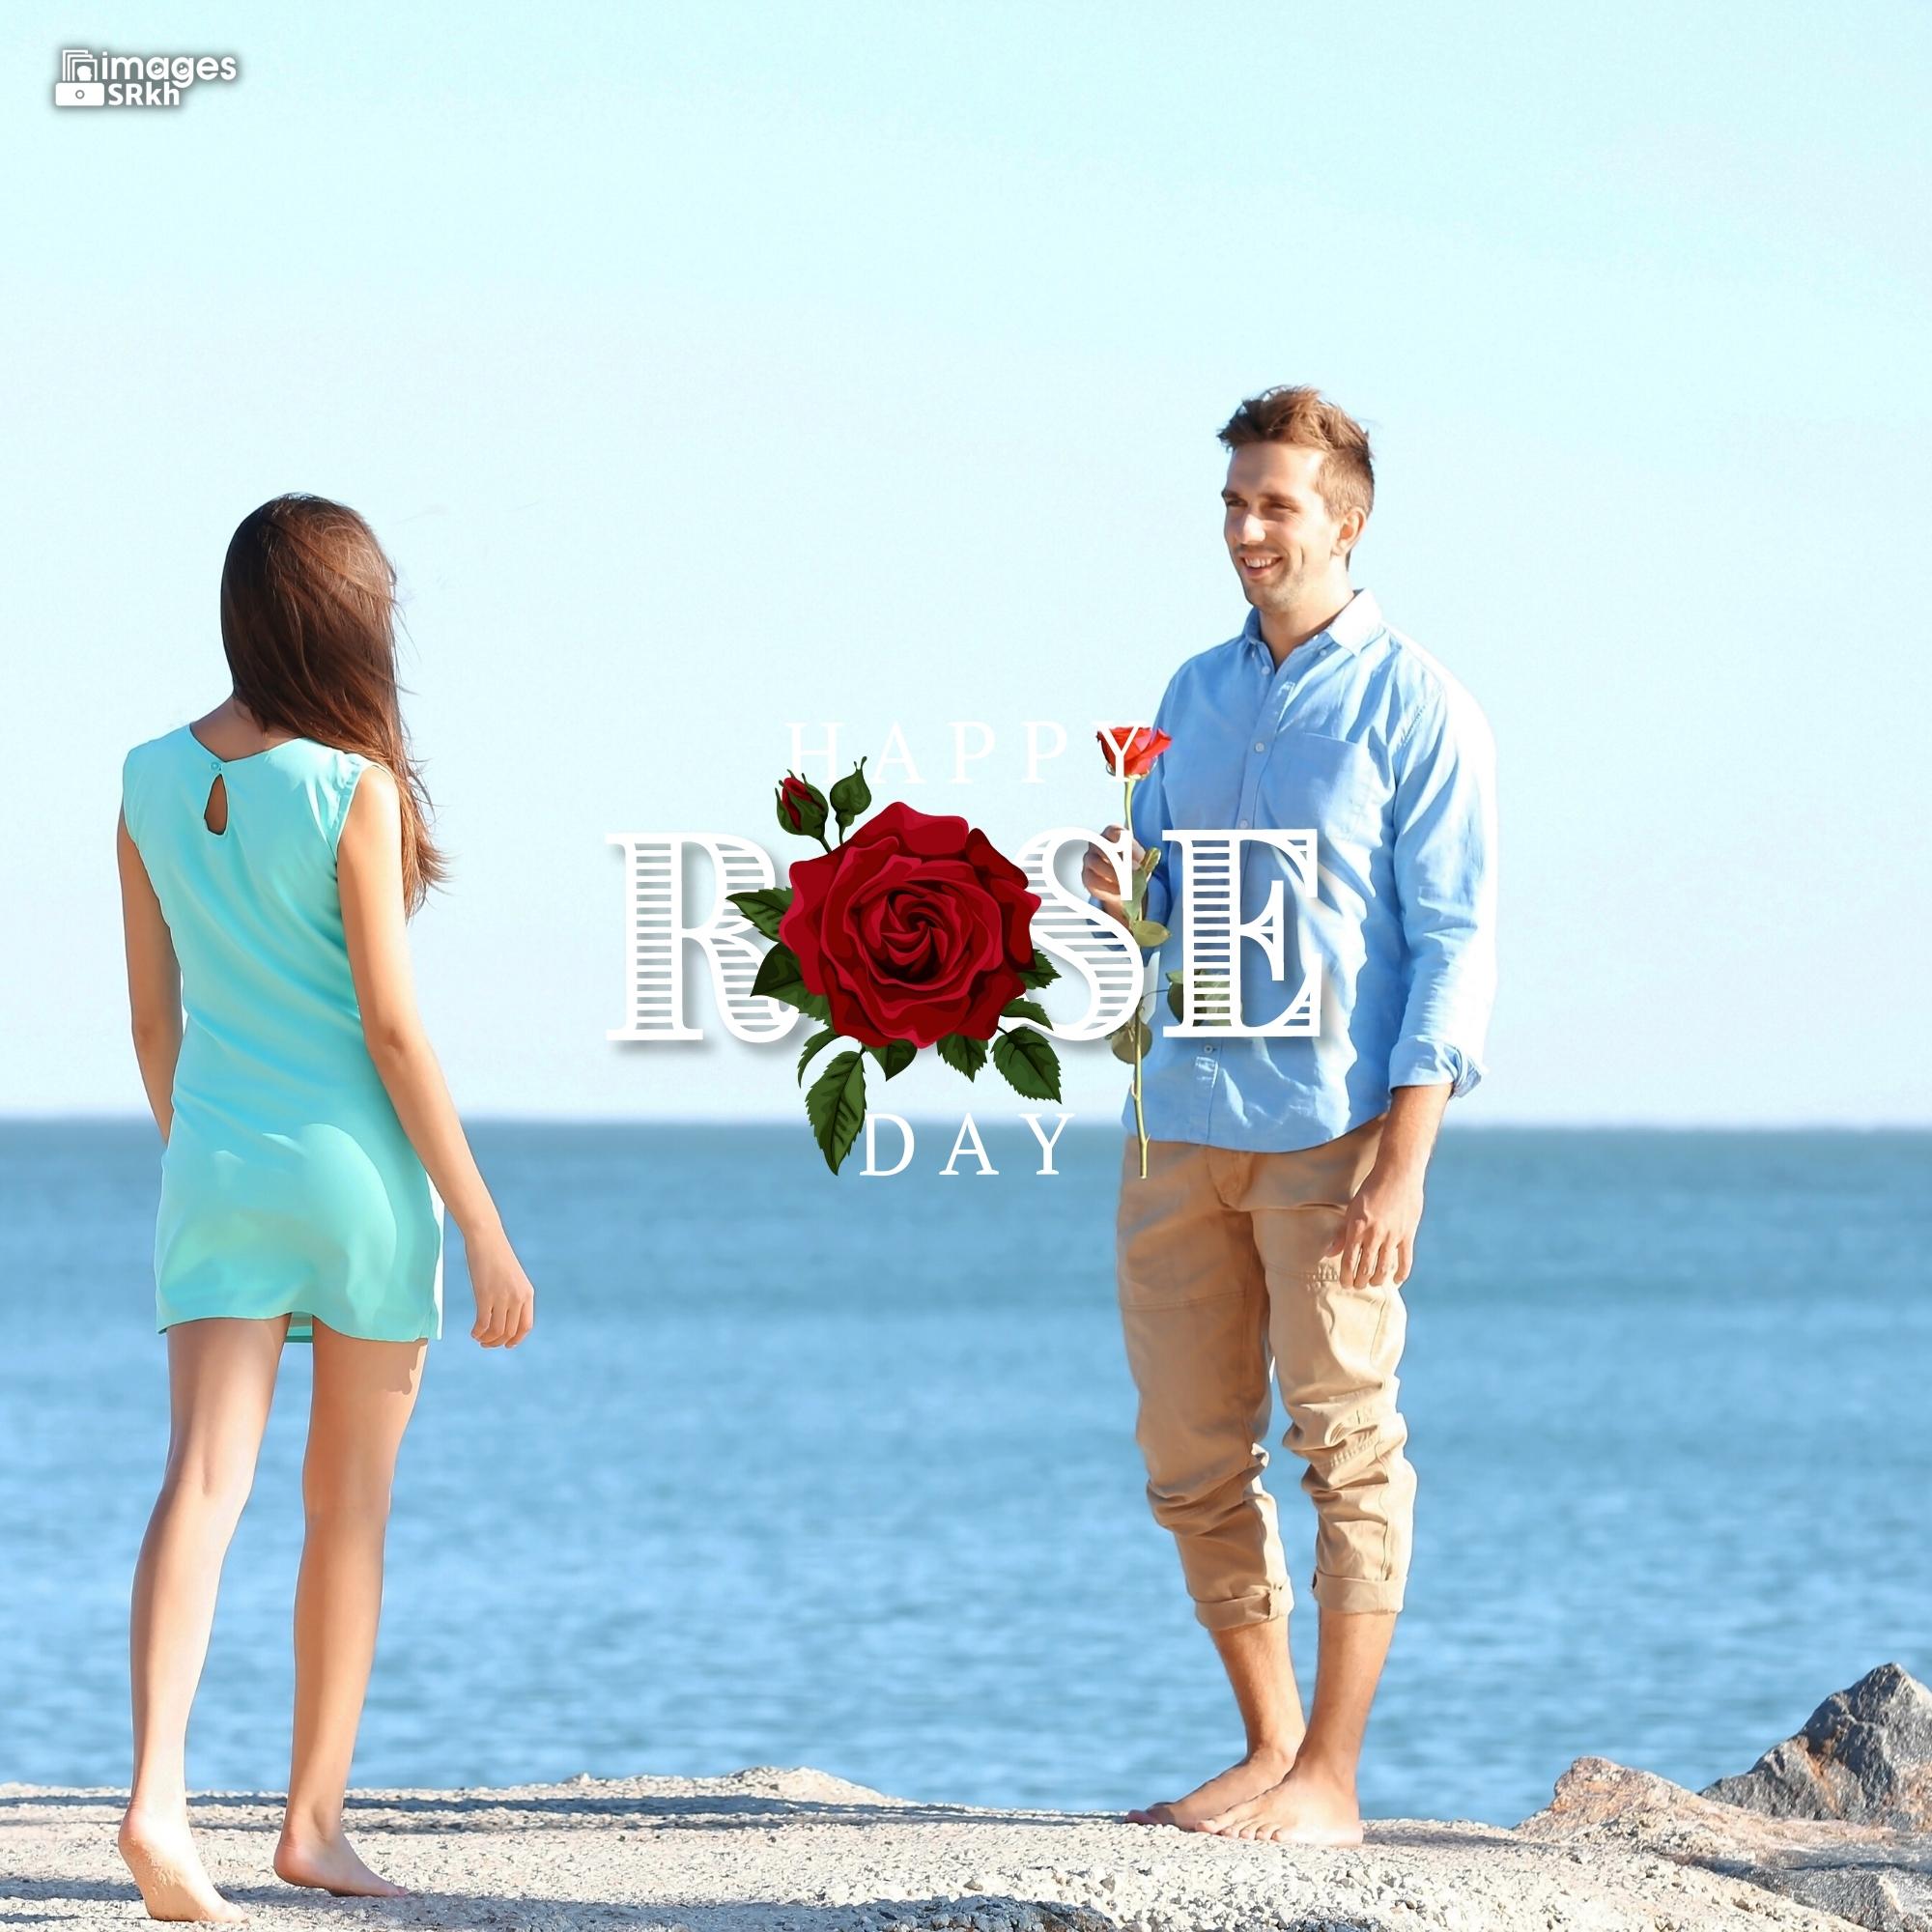 Romantic Rose Day Images Hd Download (42)